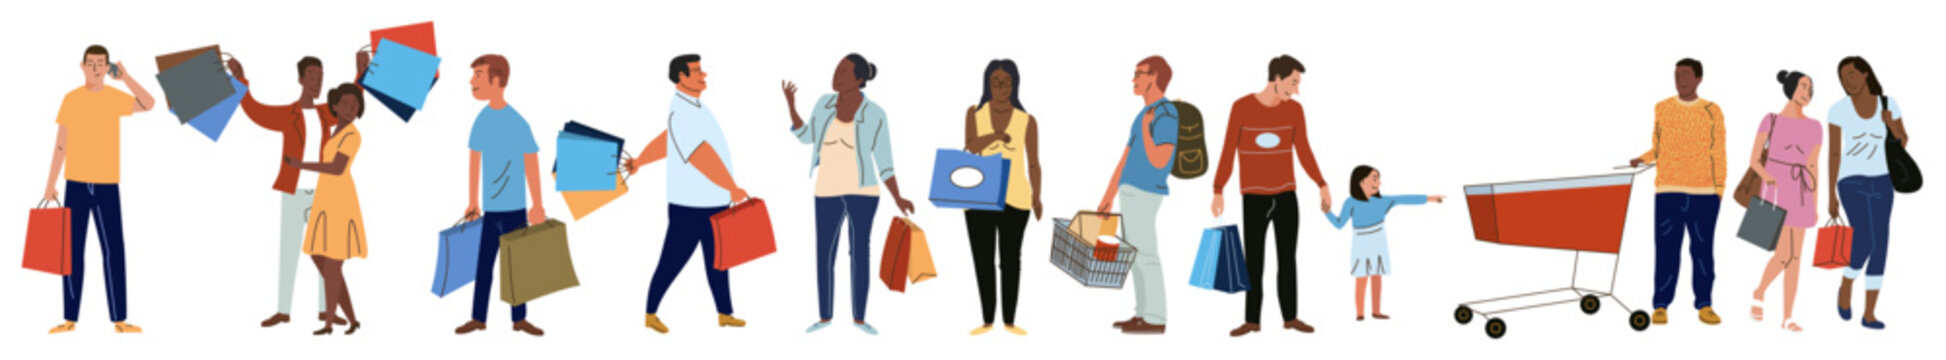 Shoppers people carry purchases from shopping mall and store, cart from supermarket set vector illustration. Cartoon young man and woman holding bags isolated white. Shop, lifestyle, retail concept